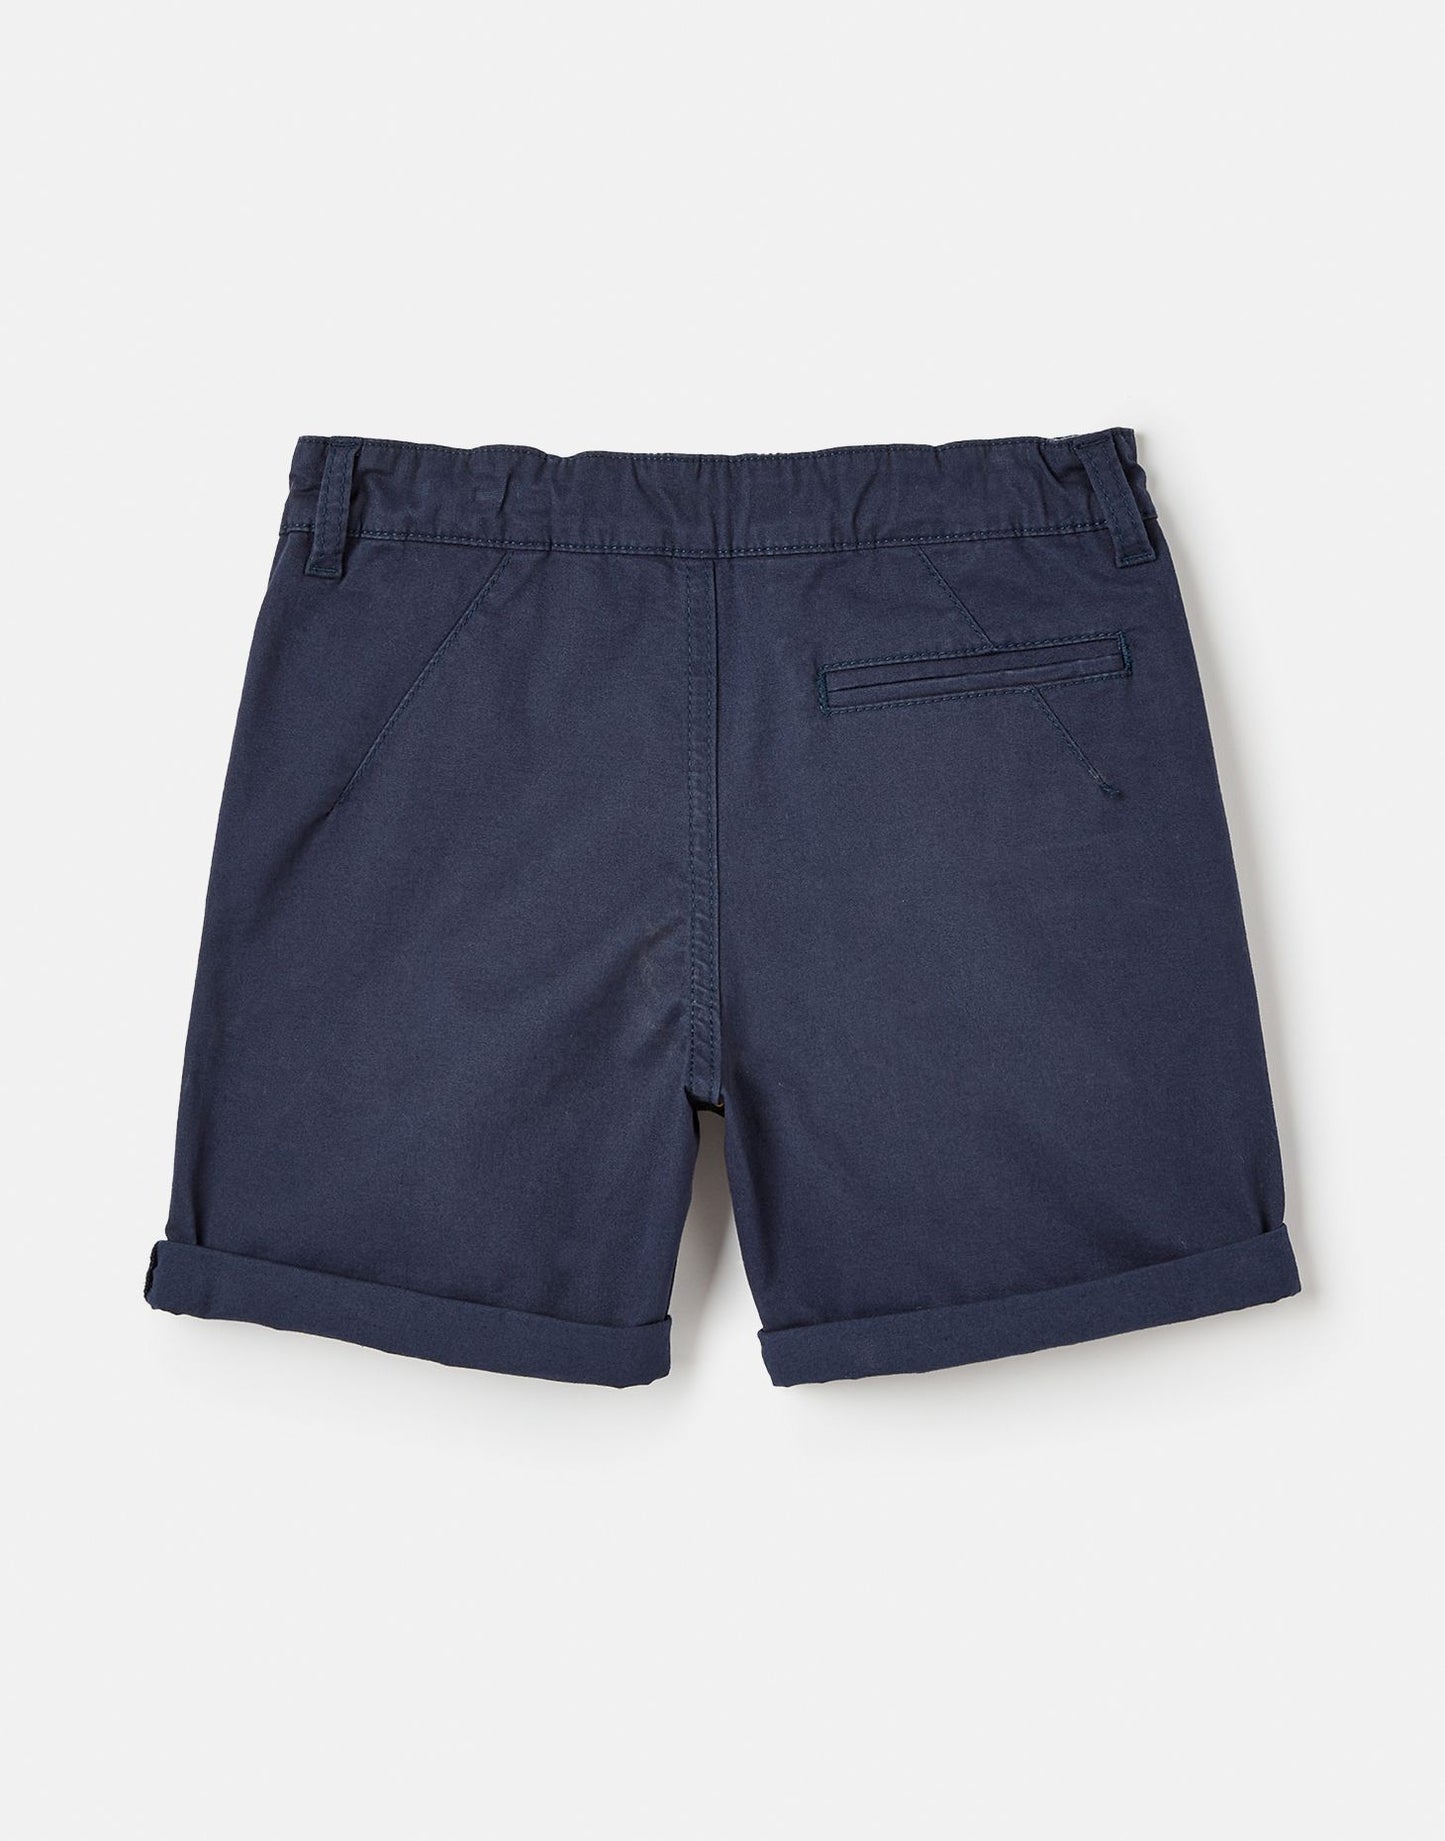 Joules Caleb Chino Shorts in Navy